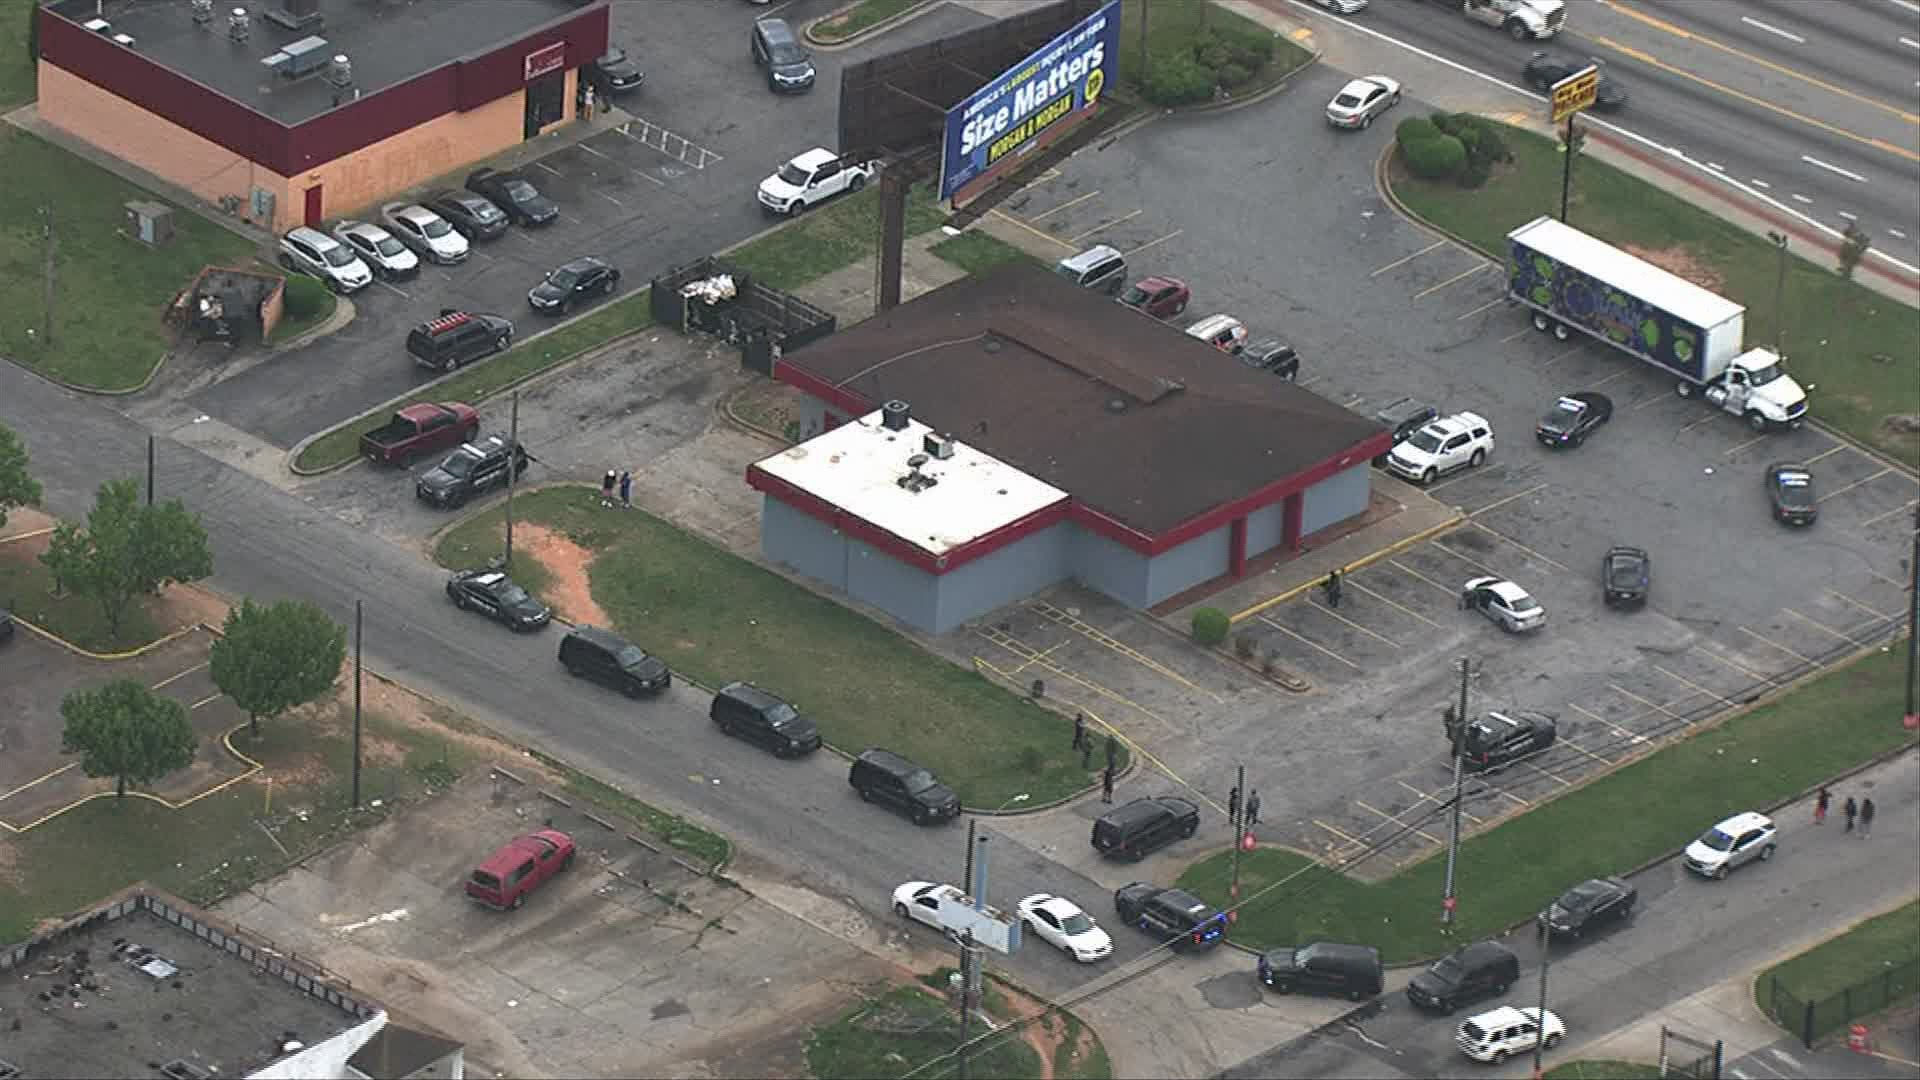 The shooting happened Thursday afternoon at the Big Man Package Store in Decatur, Georgia.